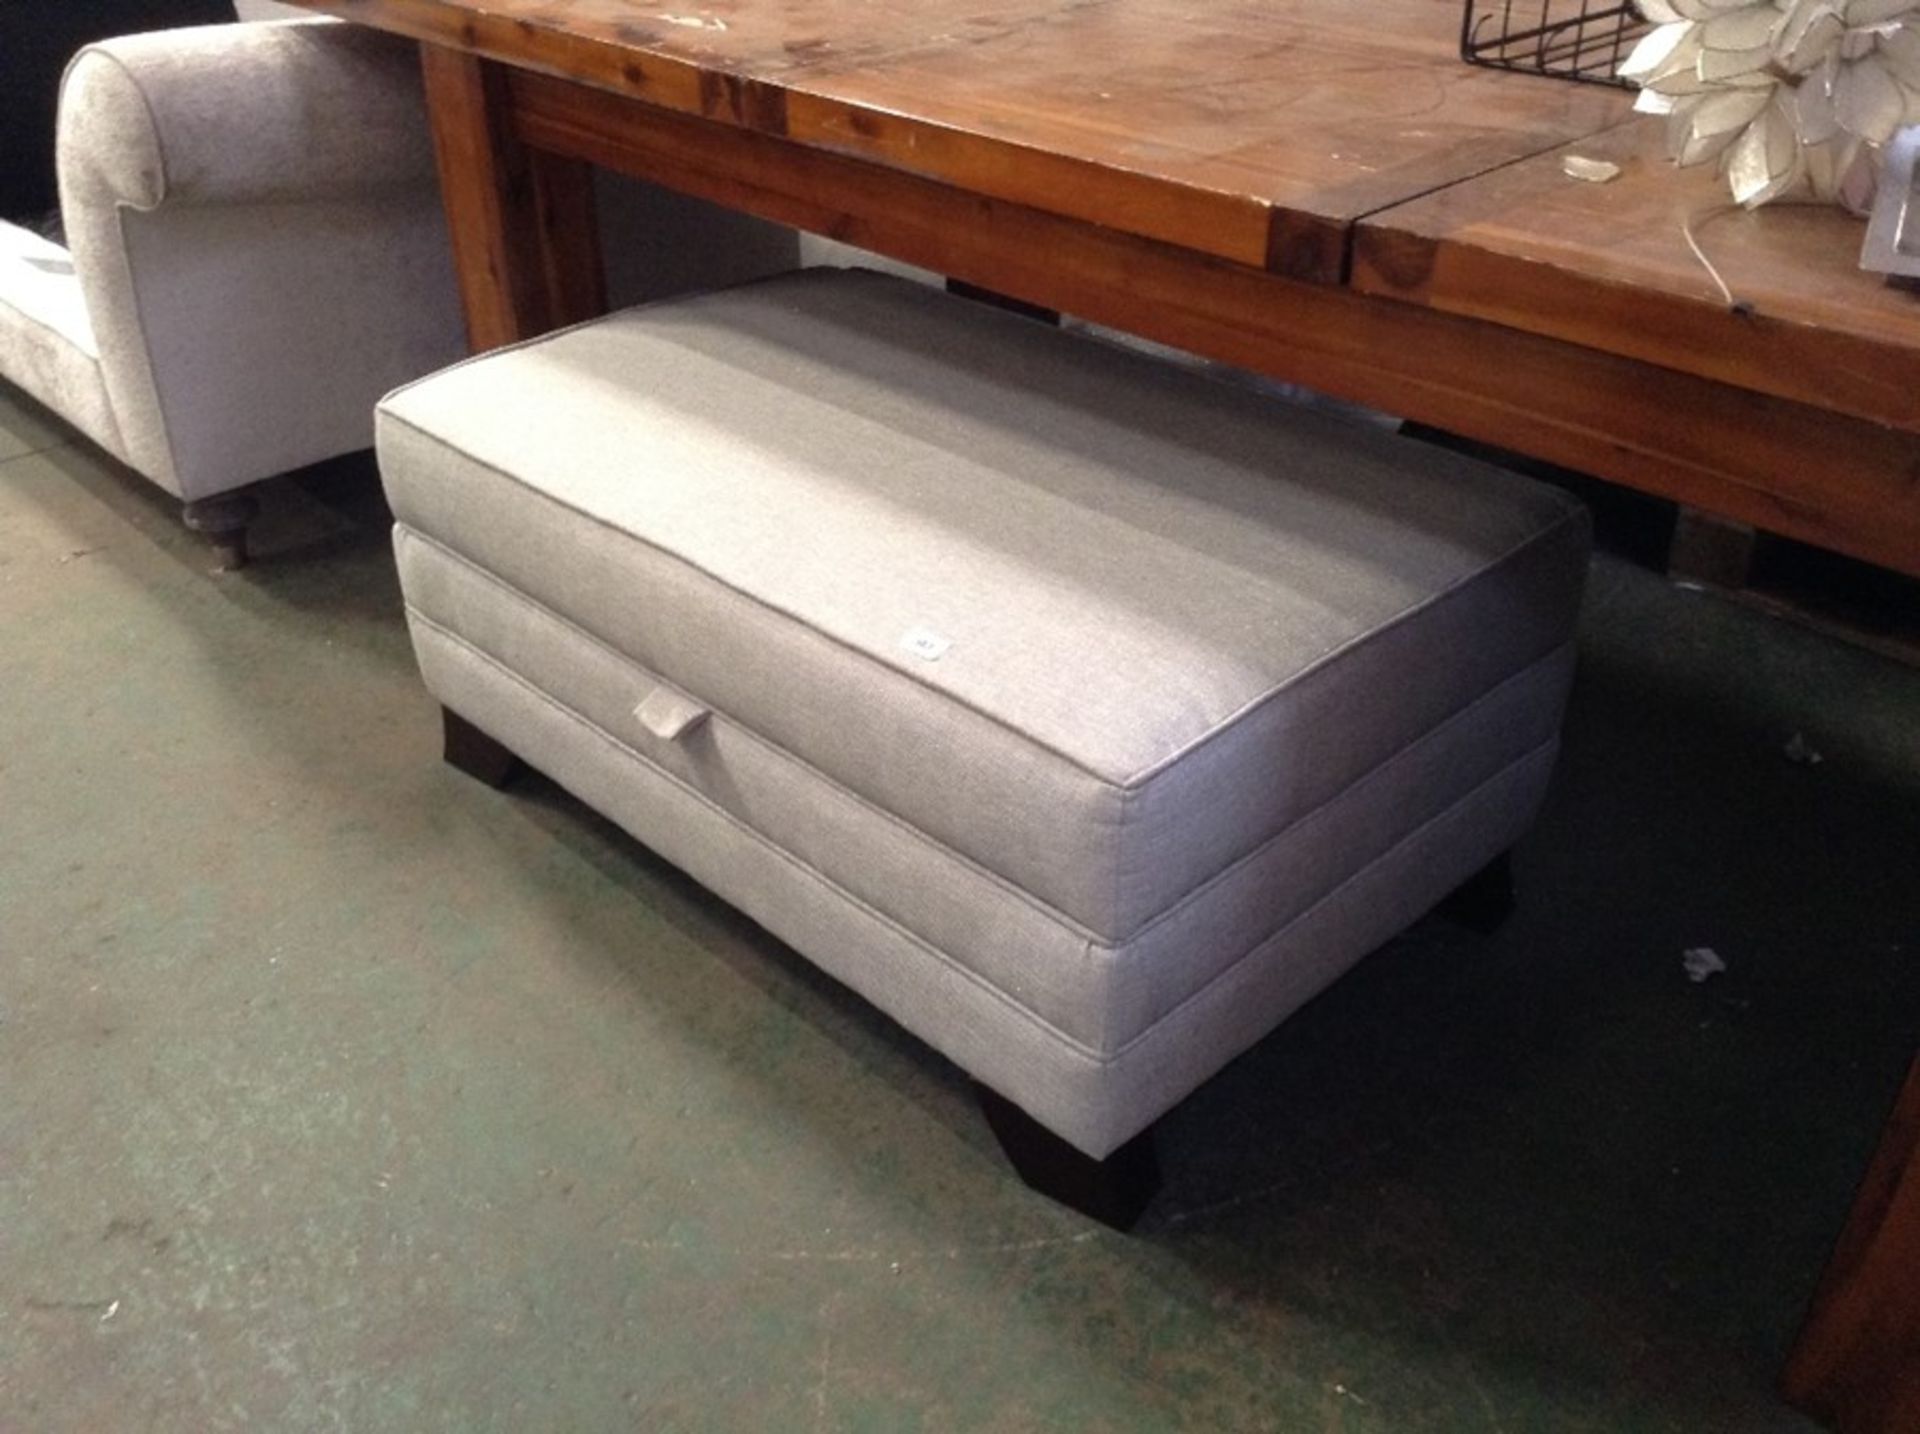 SILVER AND GREY STORAGE FOOTSTOOL (HH29_714887-3) - Image 3 of 3